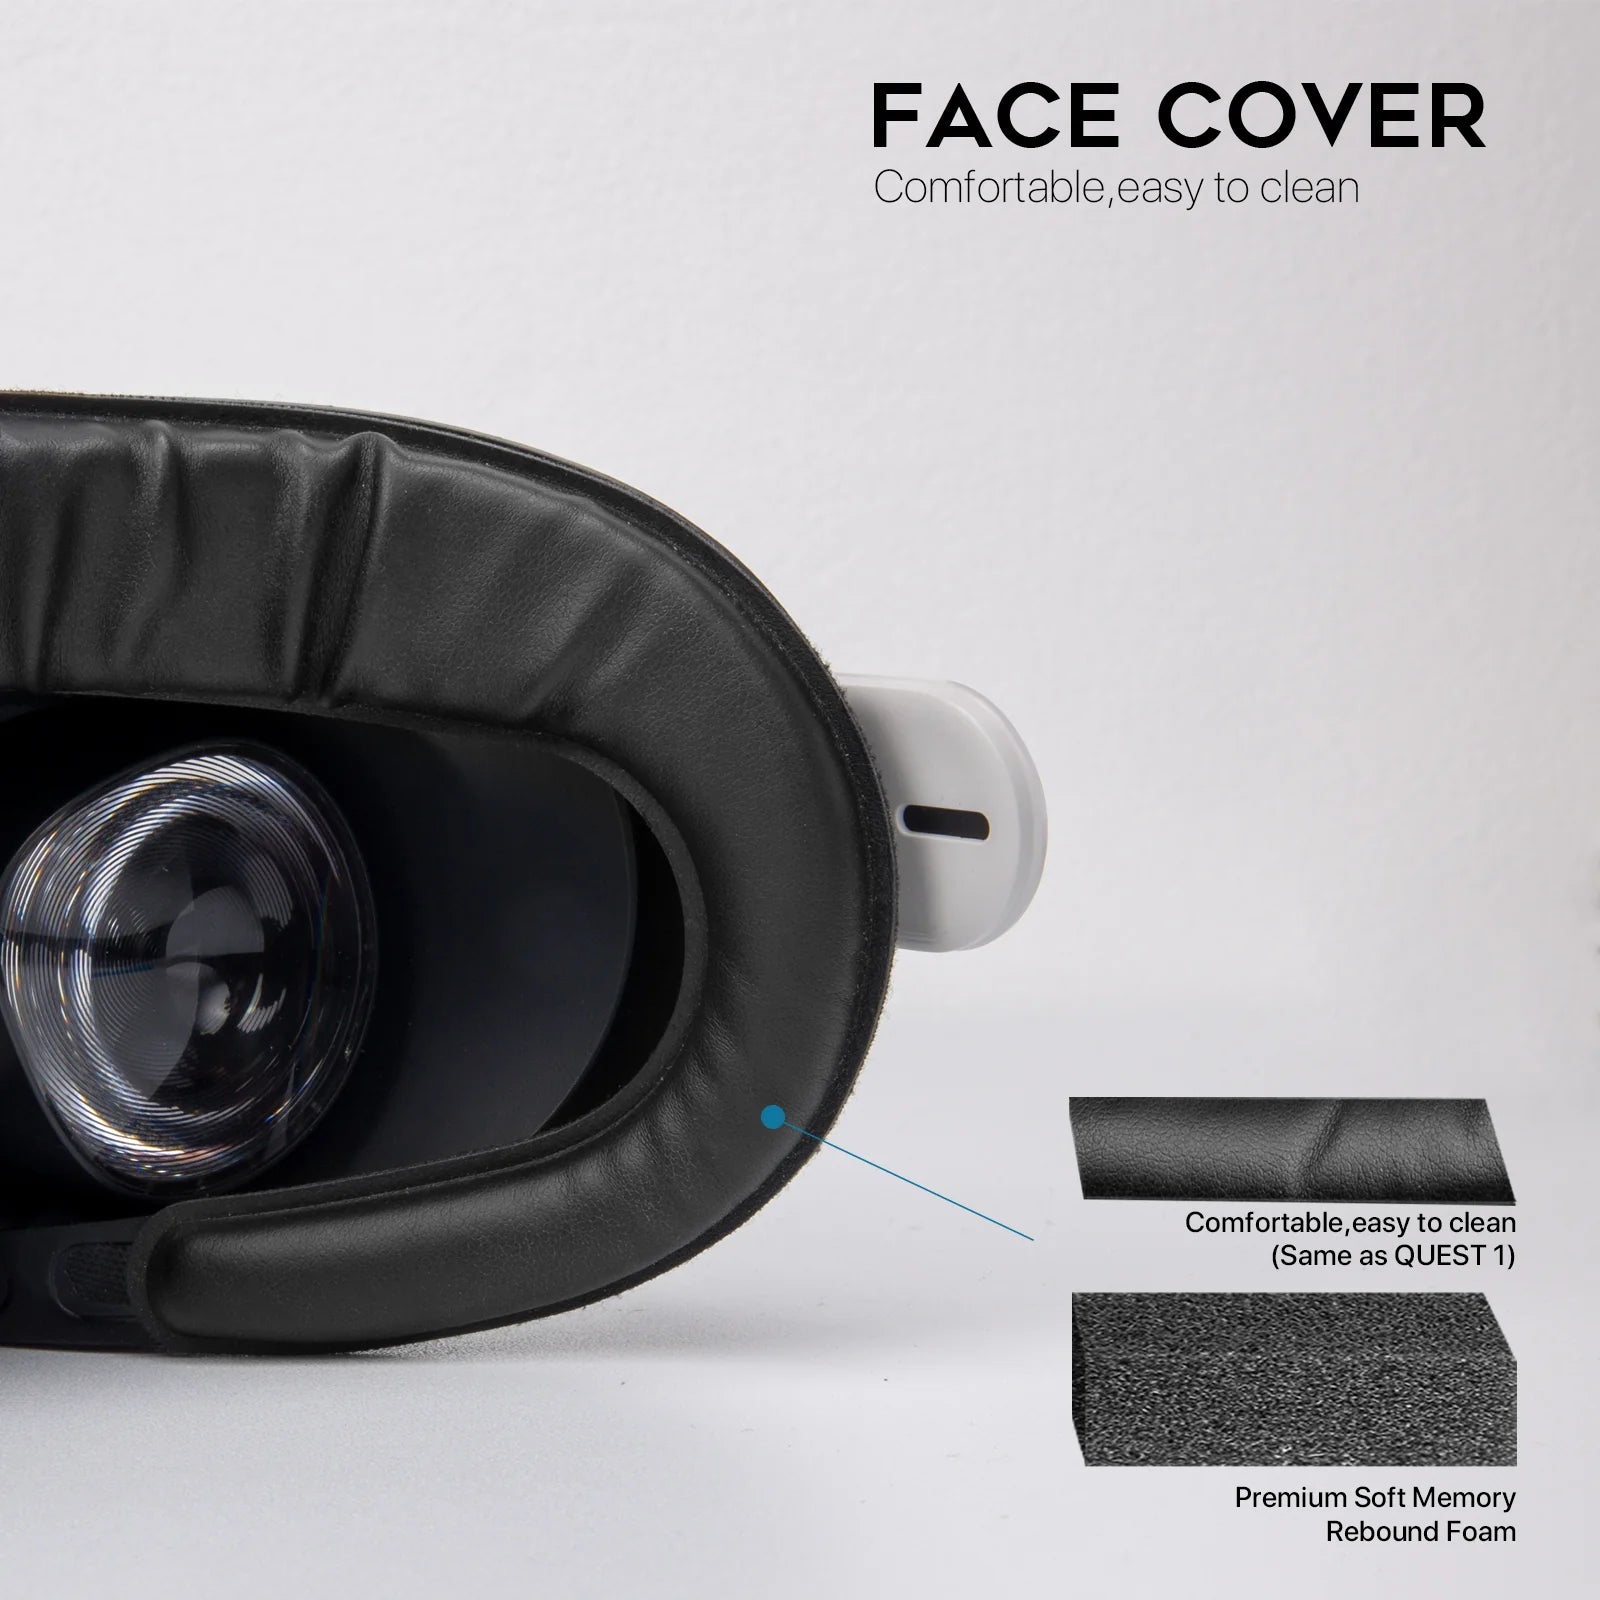 How to Replace Quest 3 Face Cover/Facial Interface (Tutorial